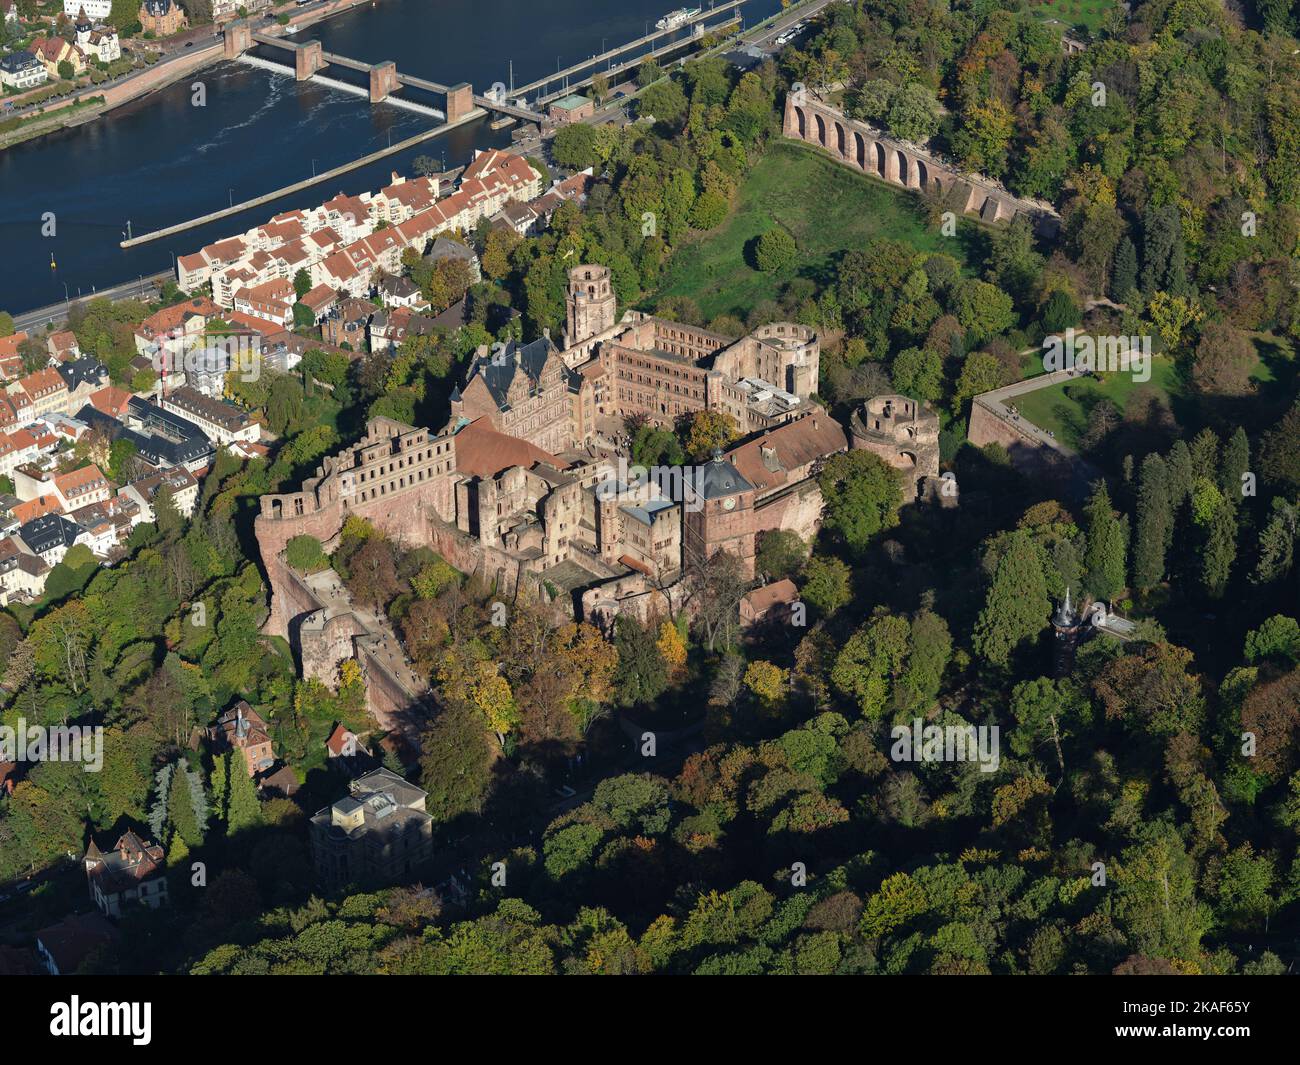 AERIAL VIEW.  The Heidelberg Castle overlooking the Old Town (Altstadt) and the Neckar River. Baden-Württemberg, Germany. Stock Photo